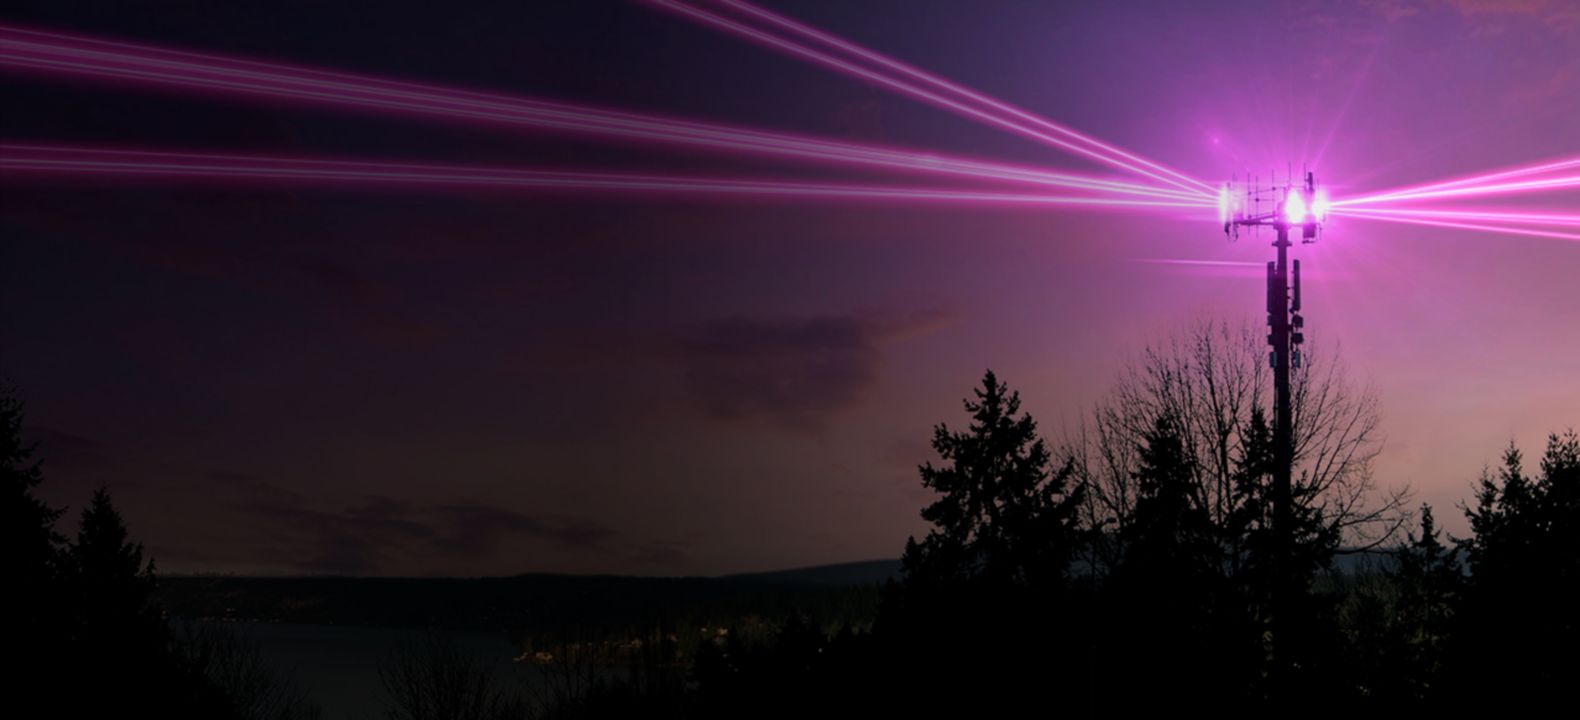 Magenta lights emanating from a cell tower. 